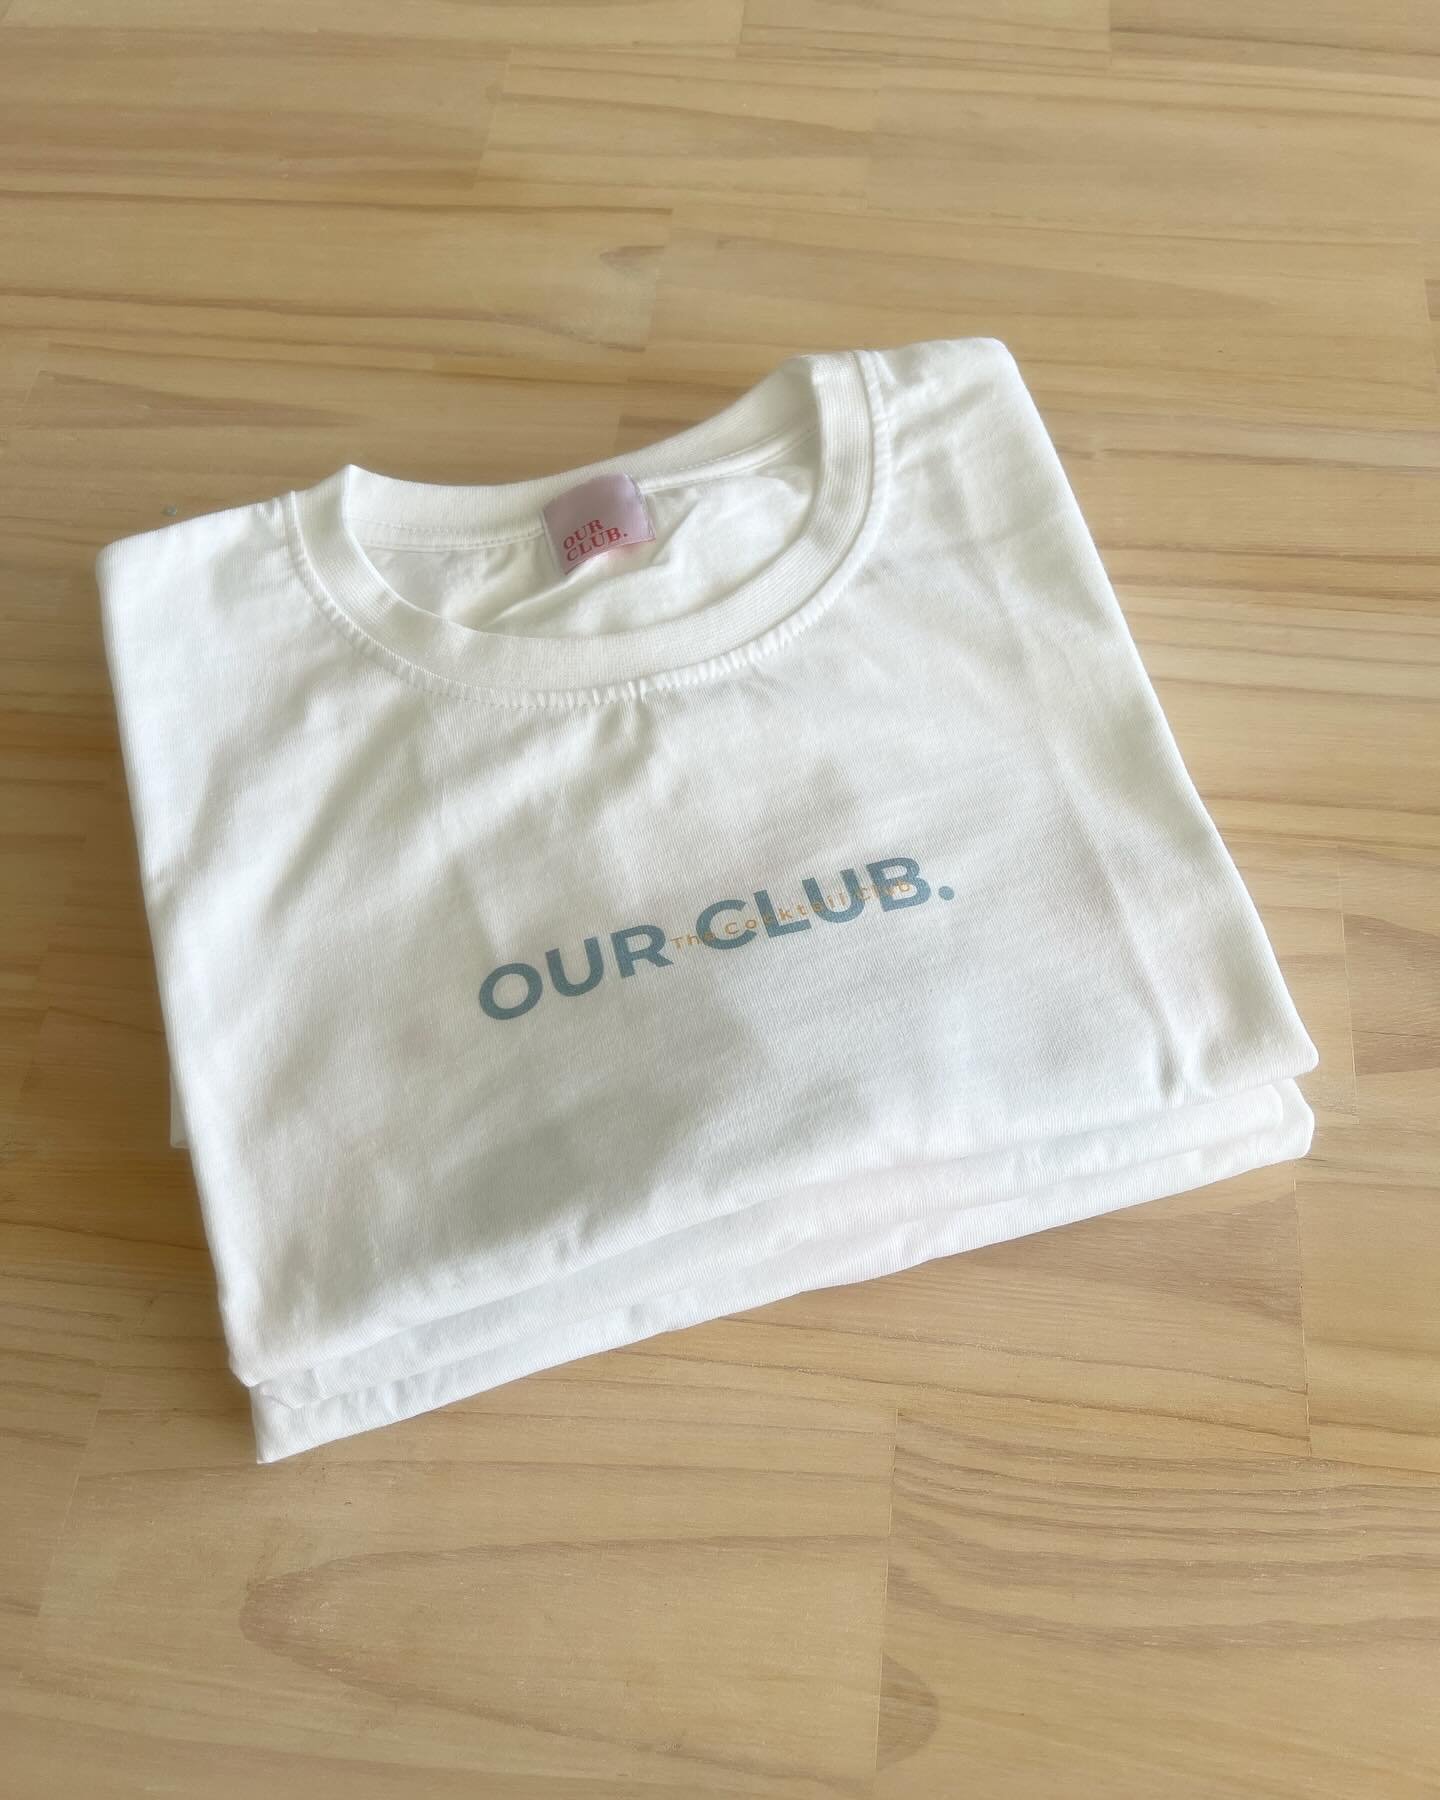 Blend in or stand out&mdash;our tees are here for your next pour decision. 🍾
#thecocktailclub #oversizedtee #ourclub